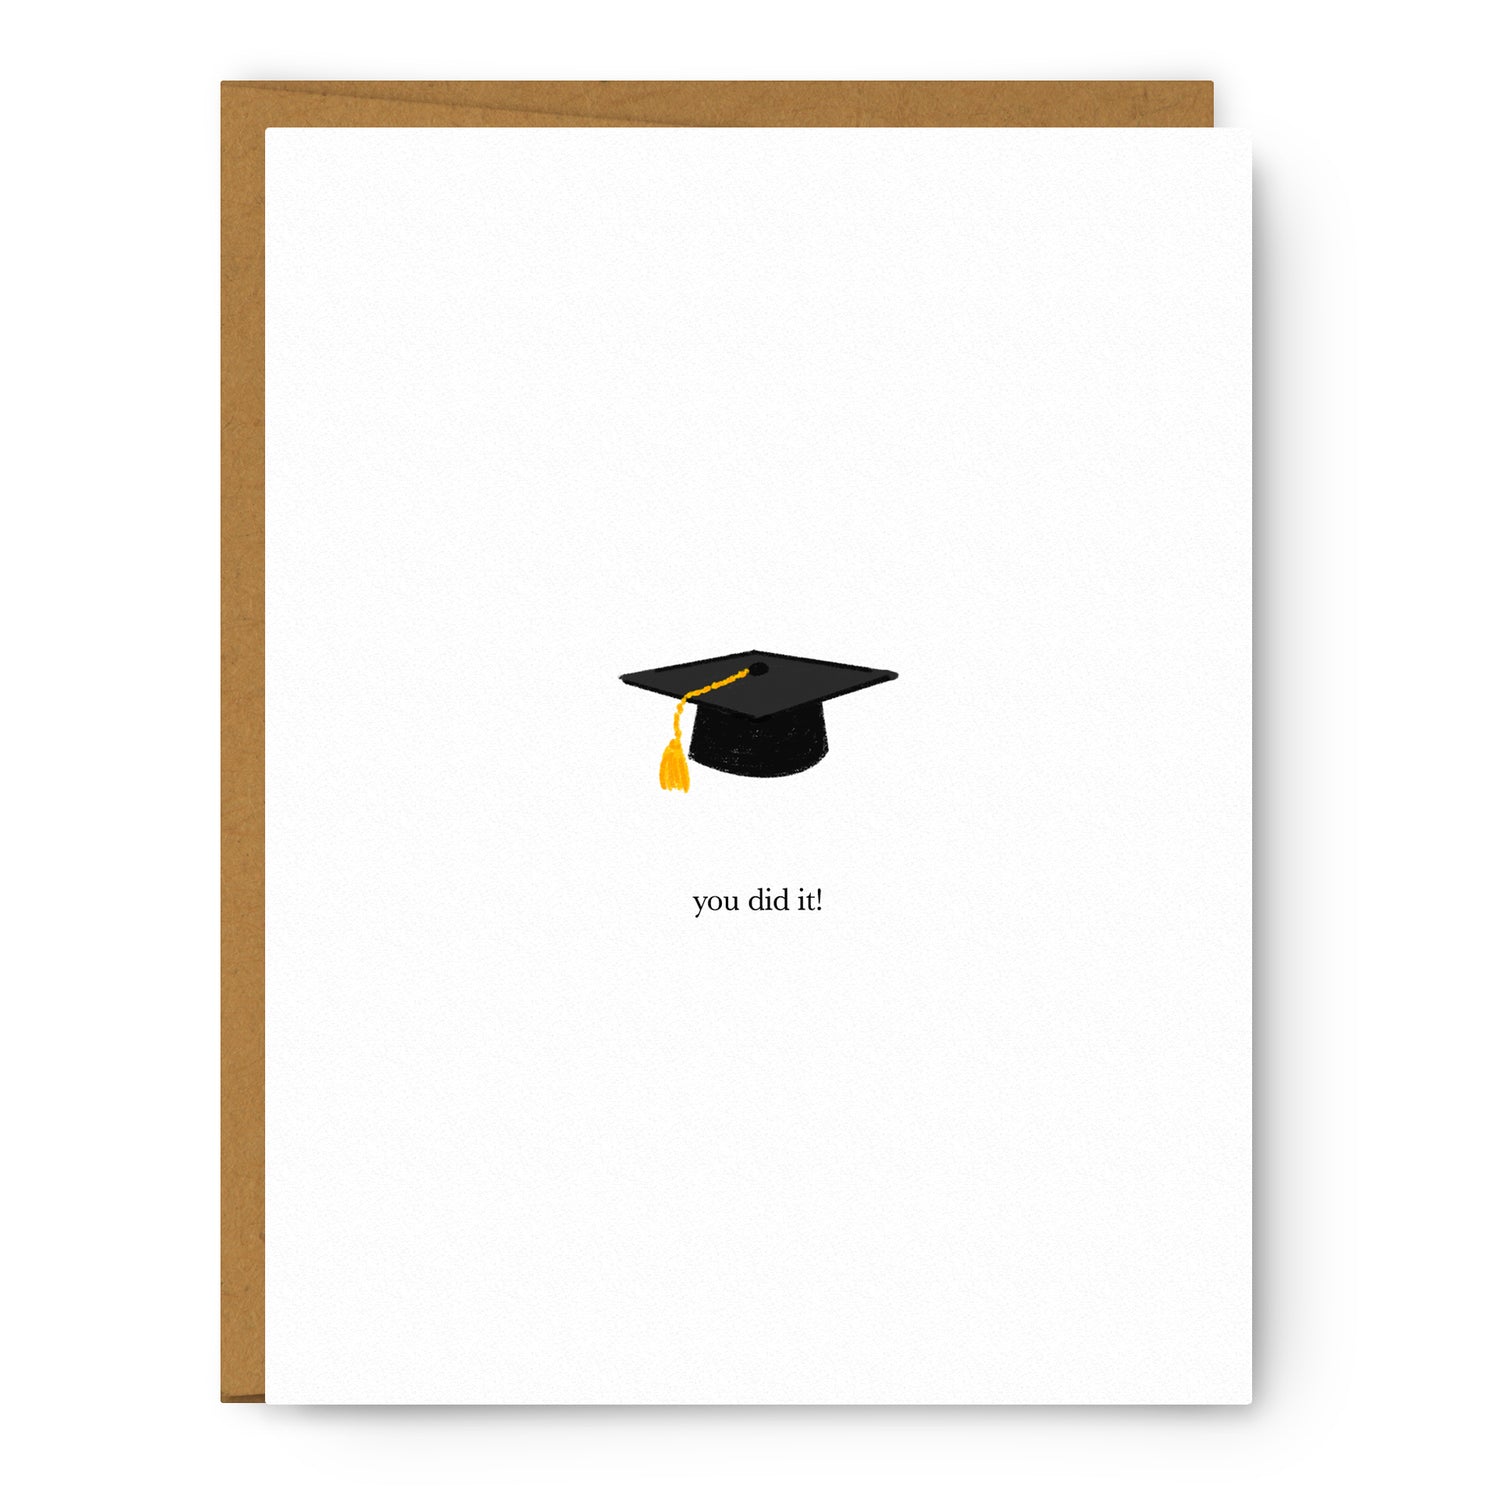 Graduation - Cap, greeting card This card is a great way to congratulate a graduate!